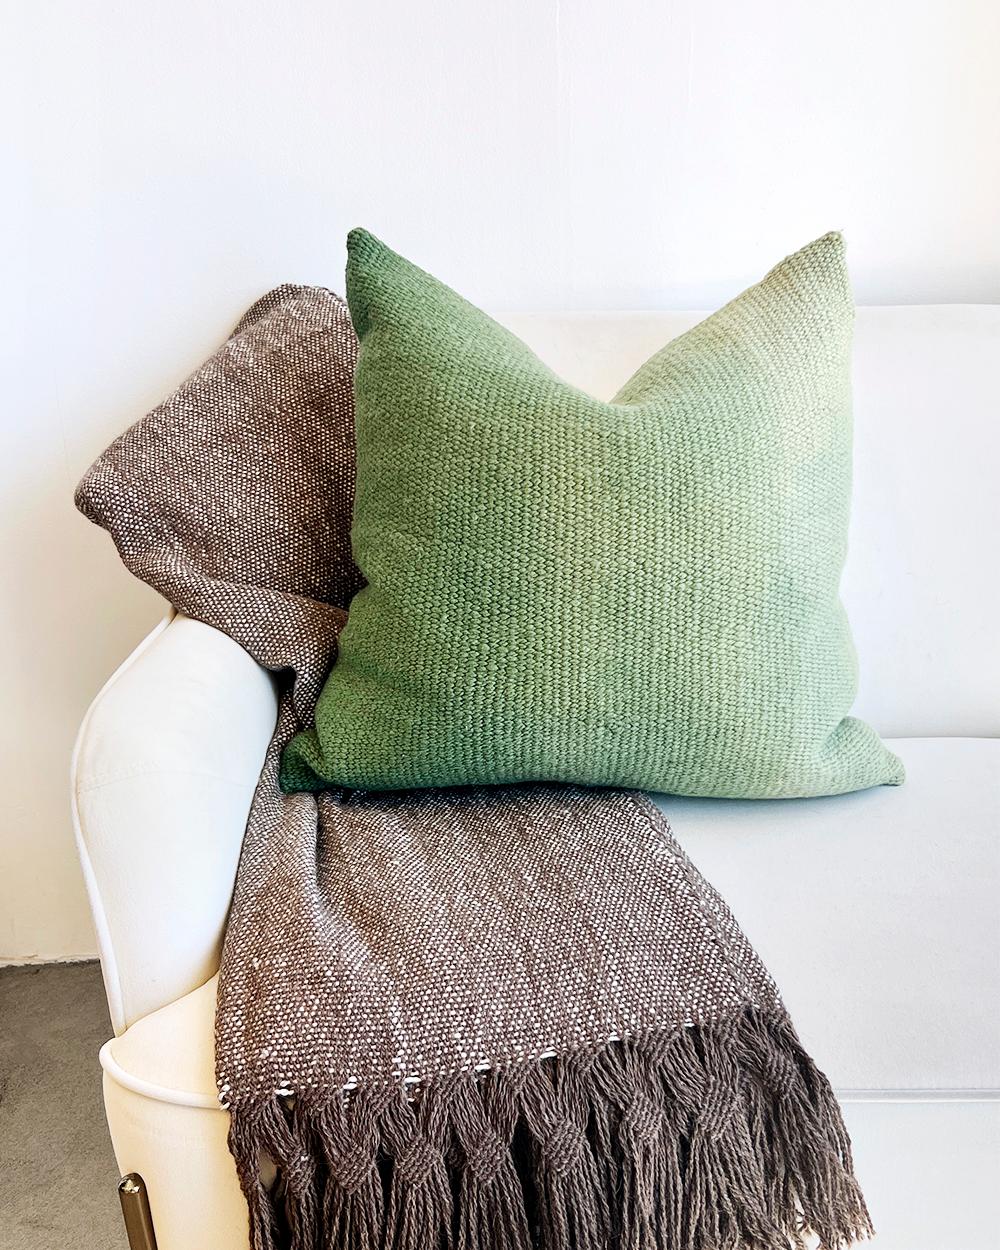 Add some color to your couch this fall
This Matiz Green Ombre Throw Pillow provides a unique way to add organic modern style to your home décor. Hand-woven from sheep wool, the ombre effect is achieved with plant dyes that give it a rustic look.